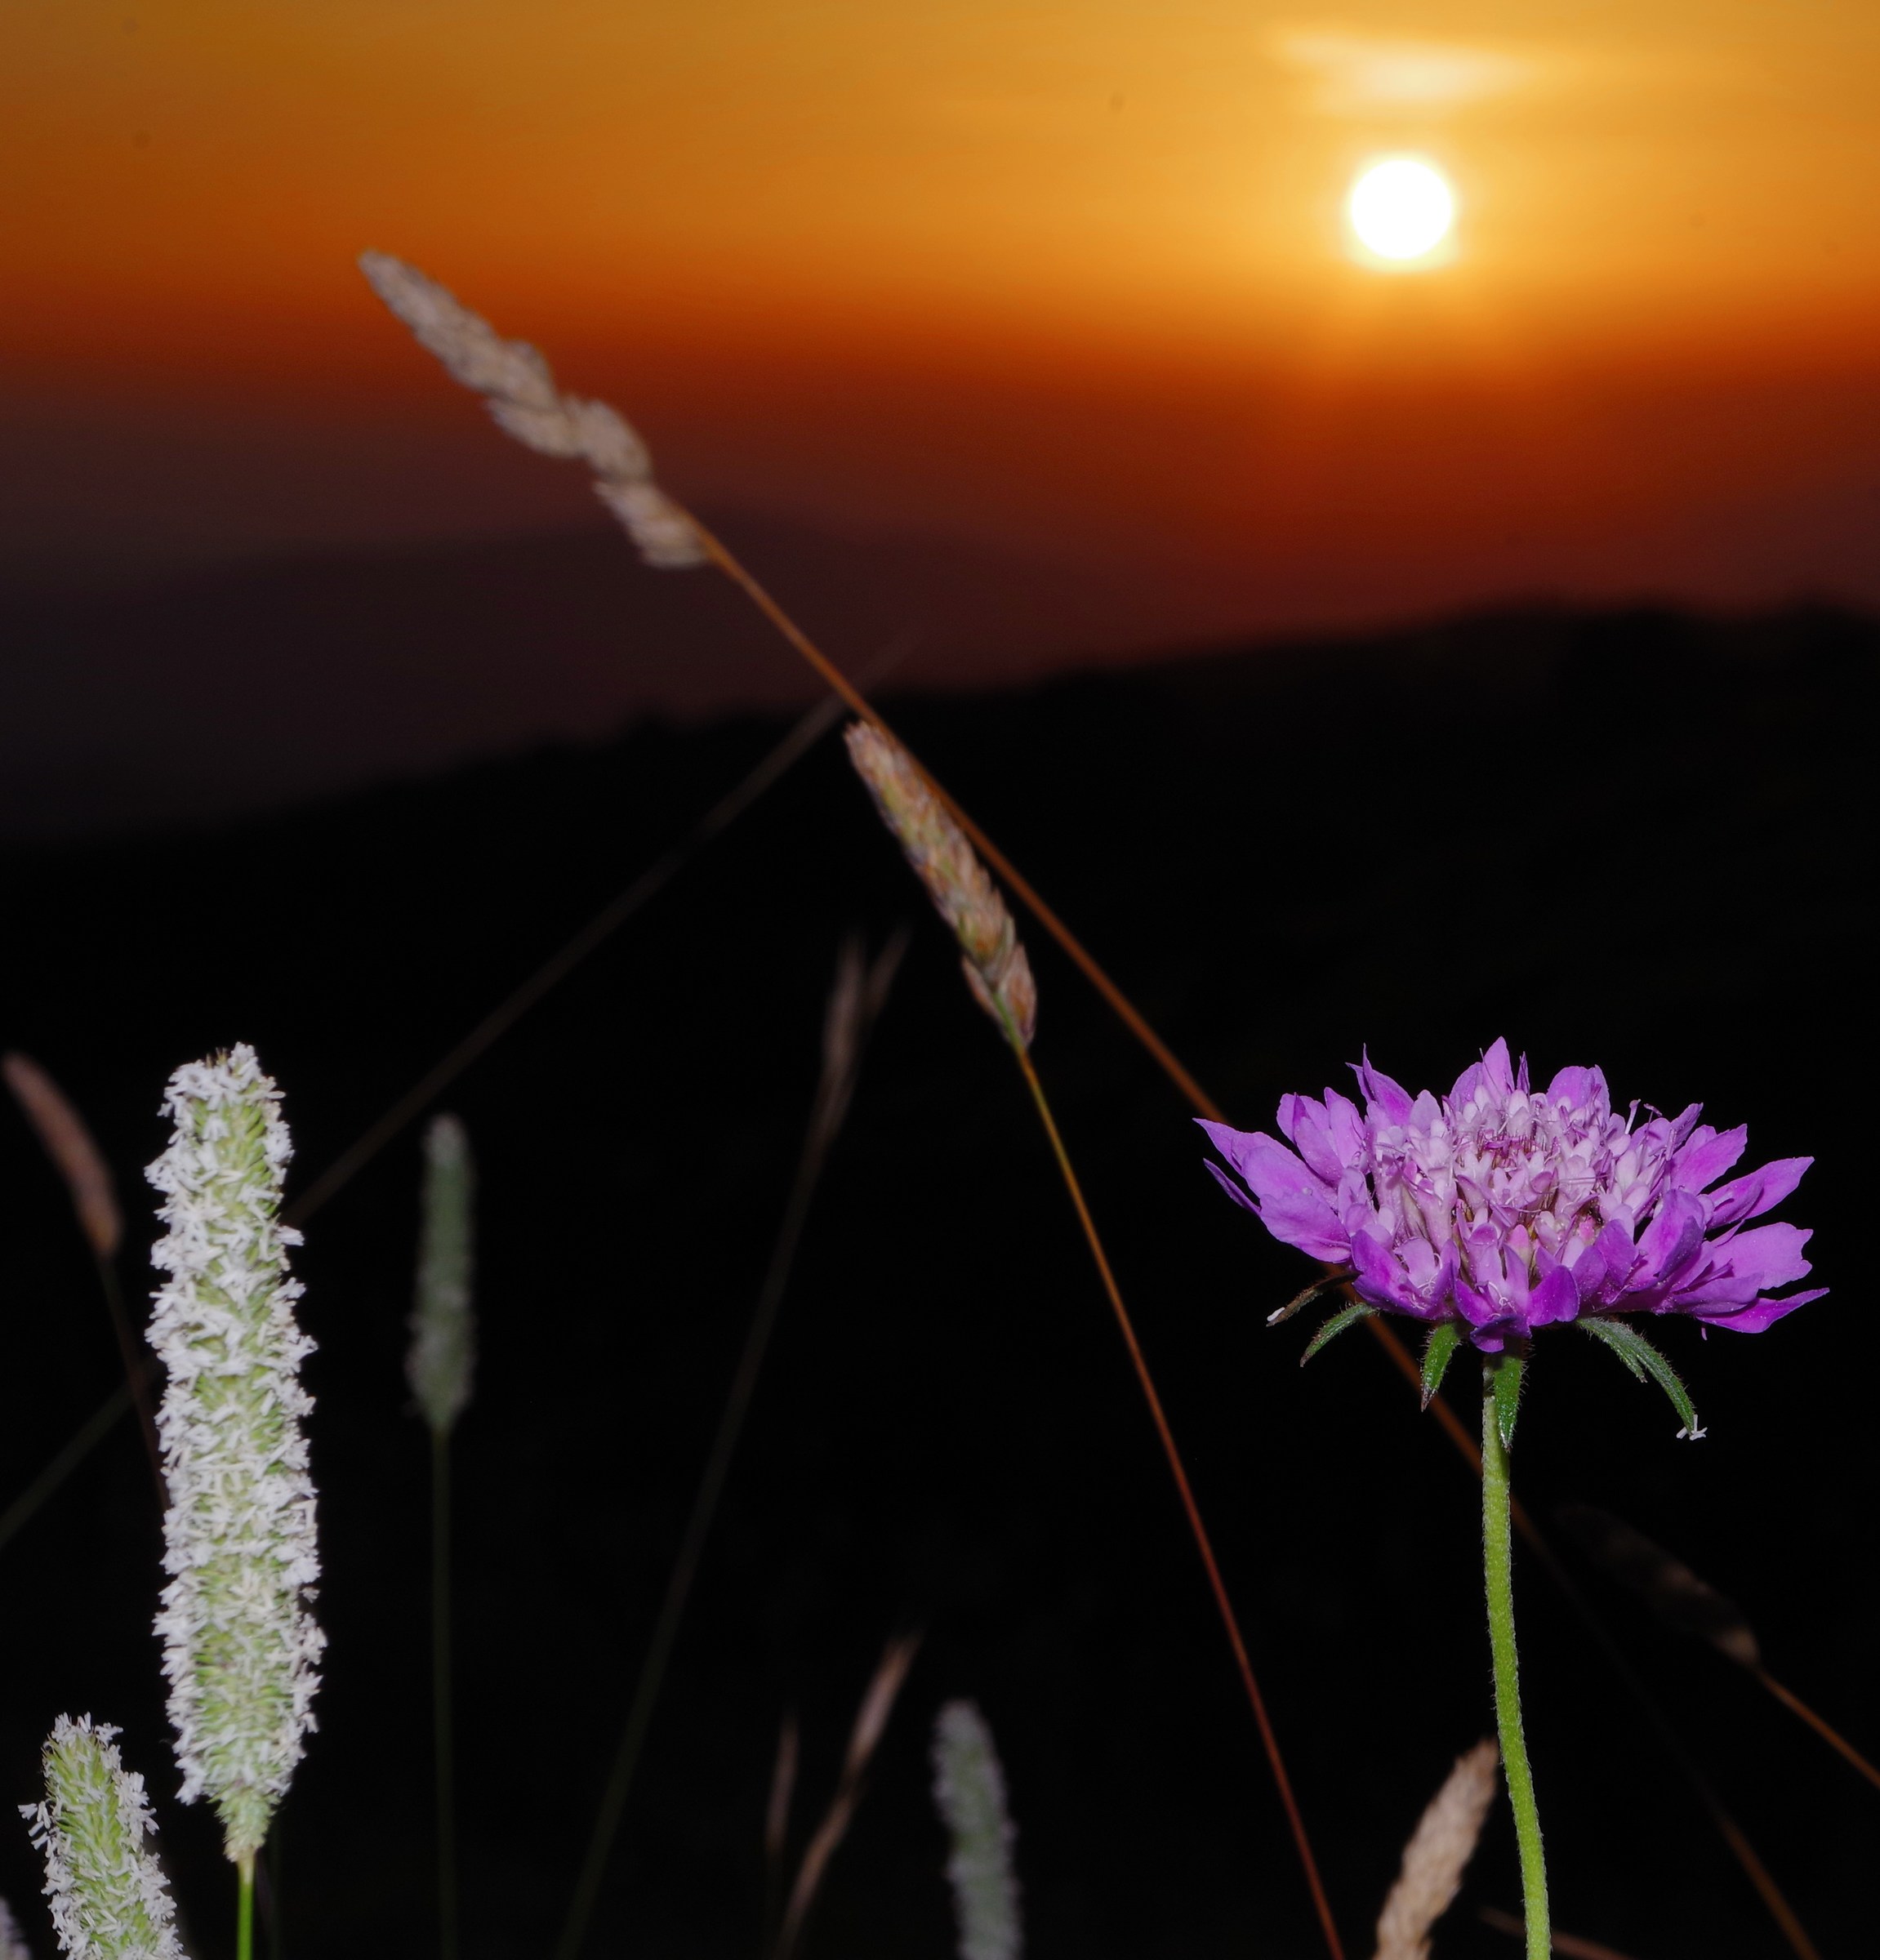 The sunset and the flower...